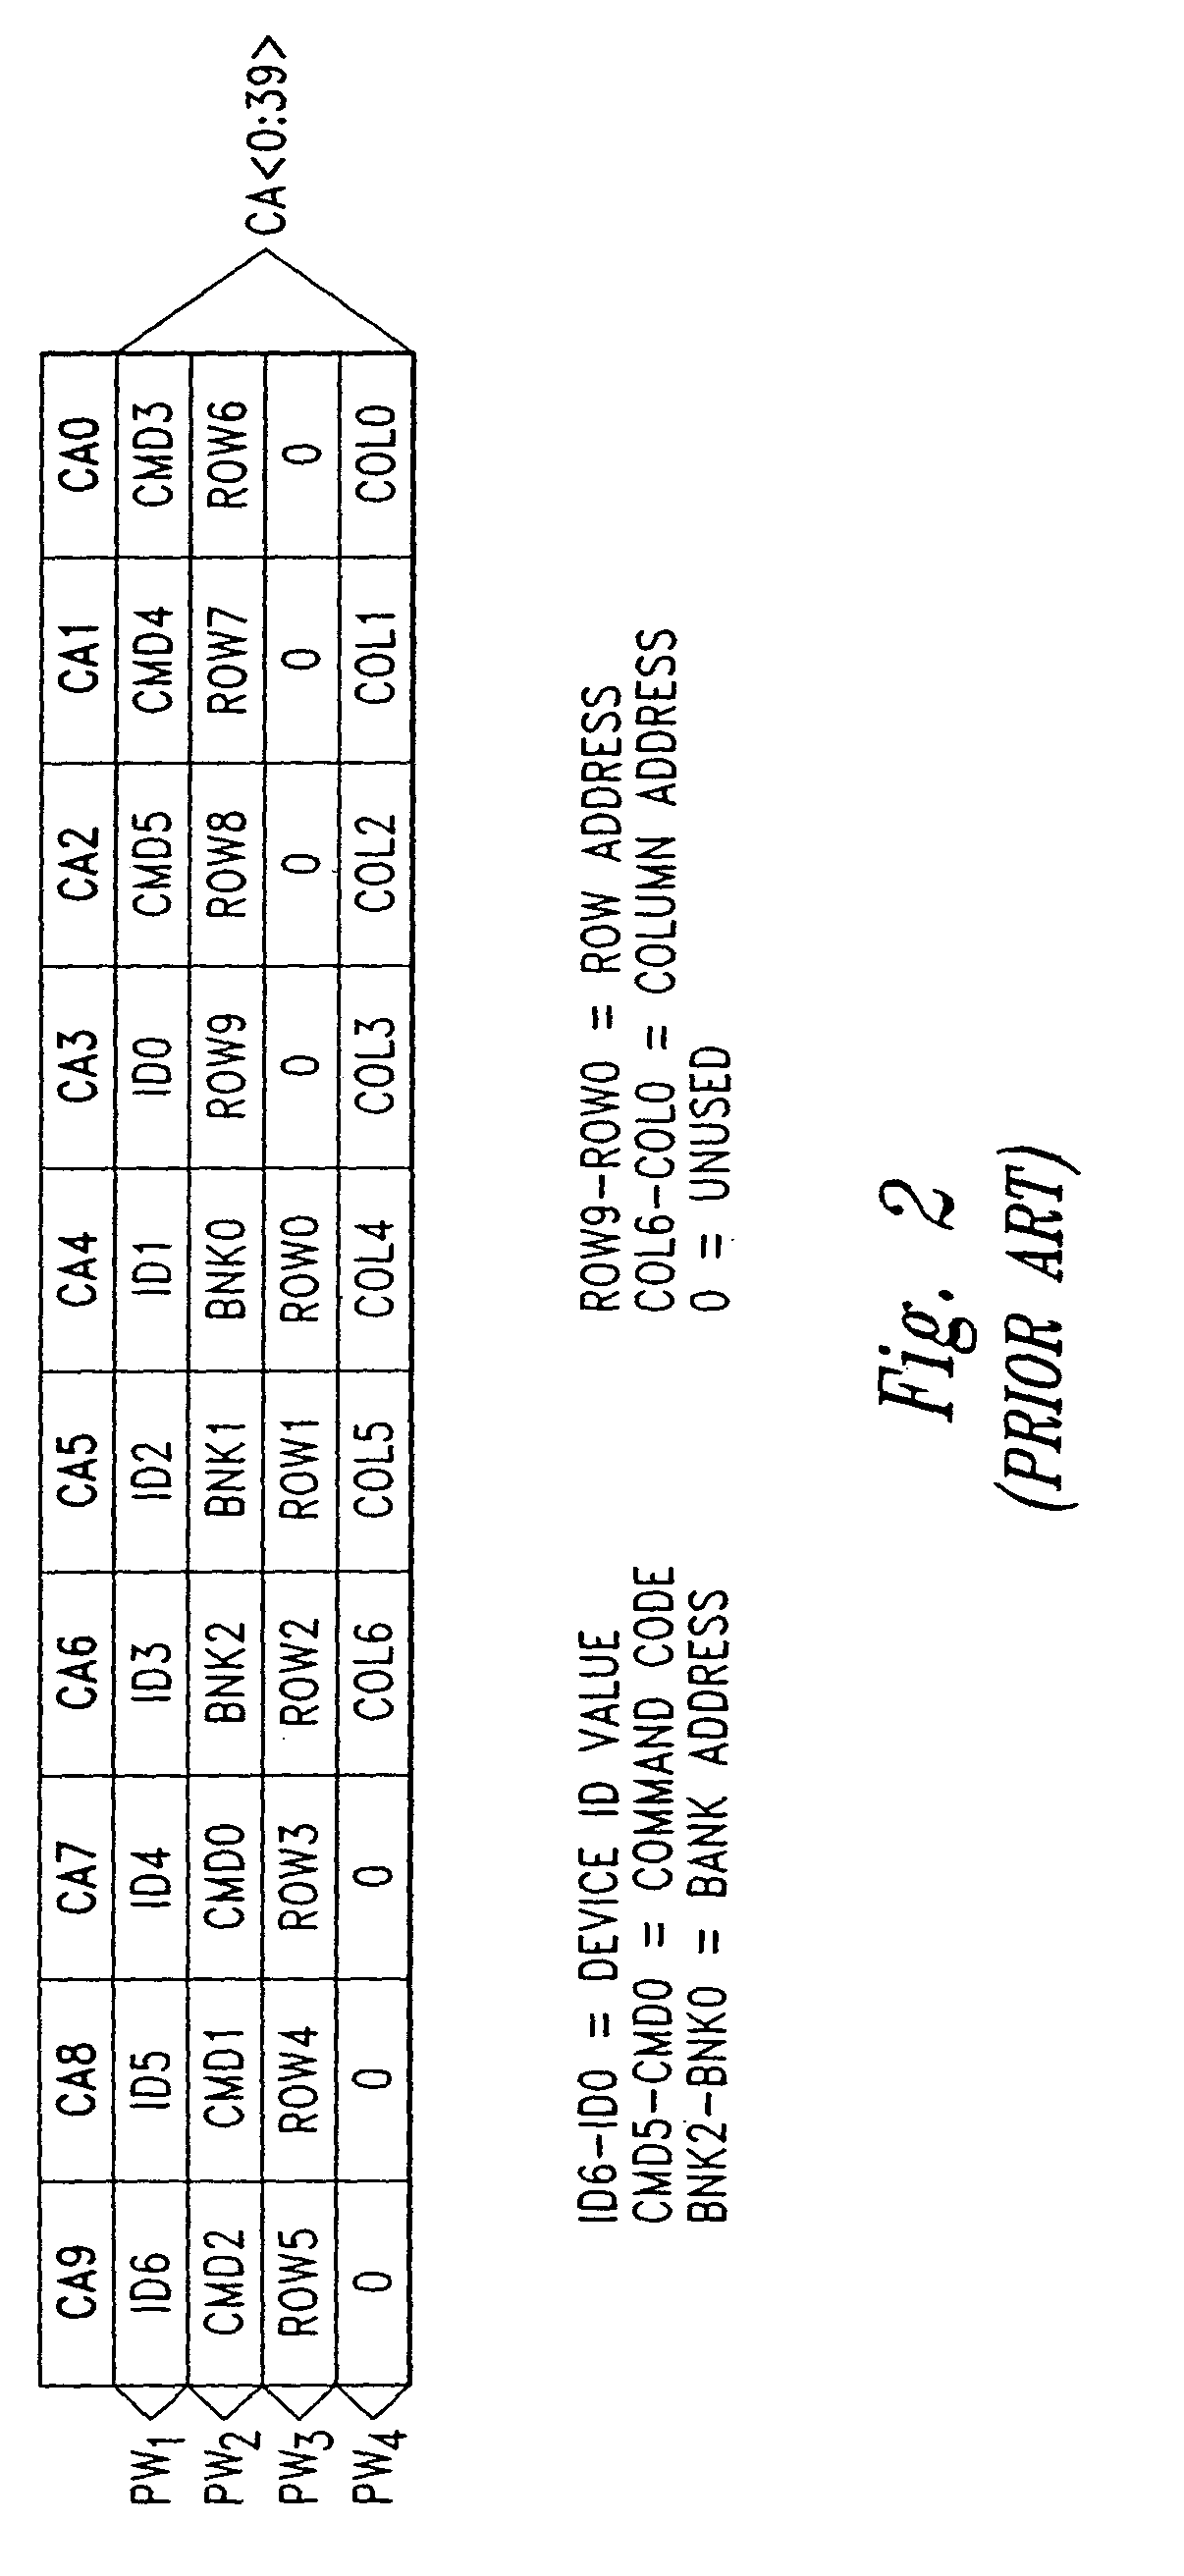 Method and apparatus for generating expect data from a captured bit pattern, and memory device using same